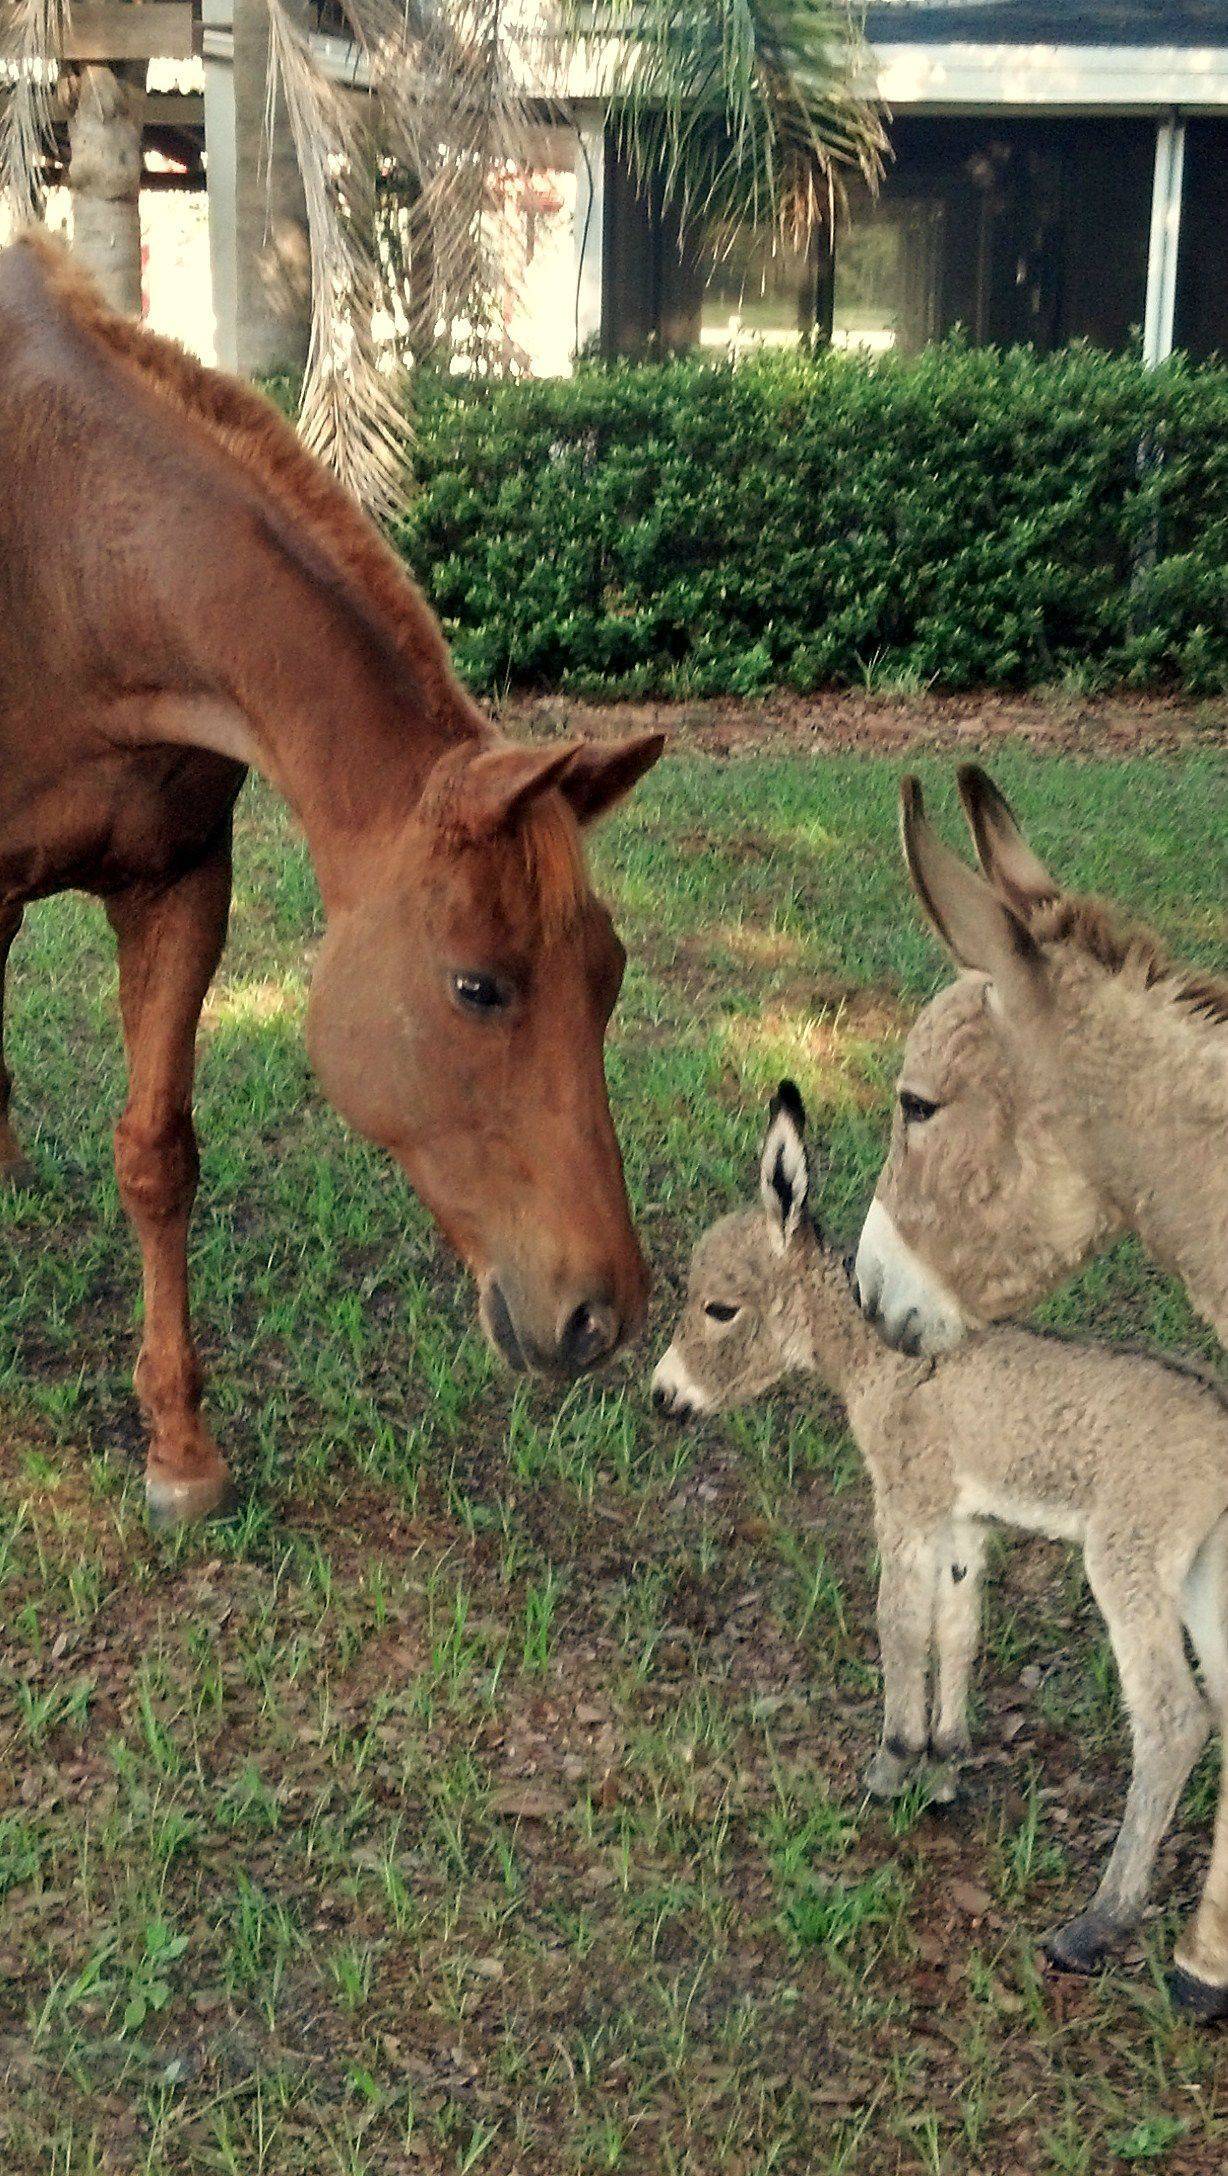 NEWSFLASH: Baby Donkeys are the Cutest Things on Earth!